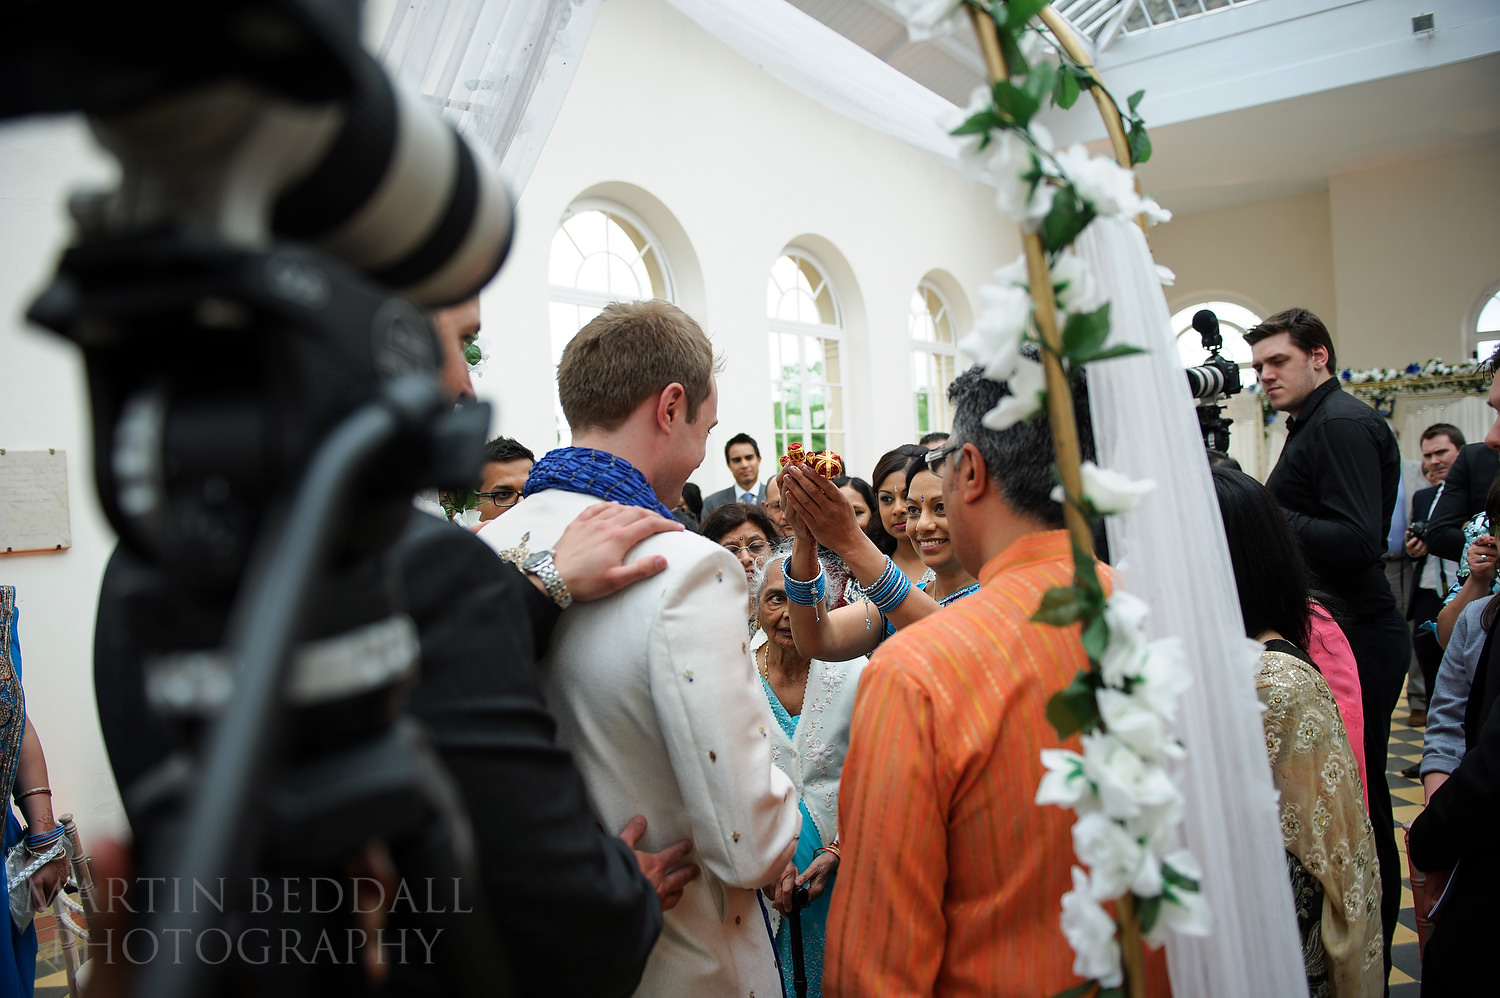 Start of the indian wedding ceremony